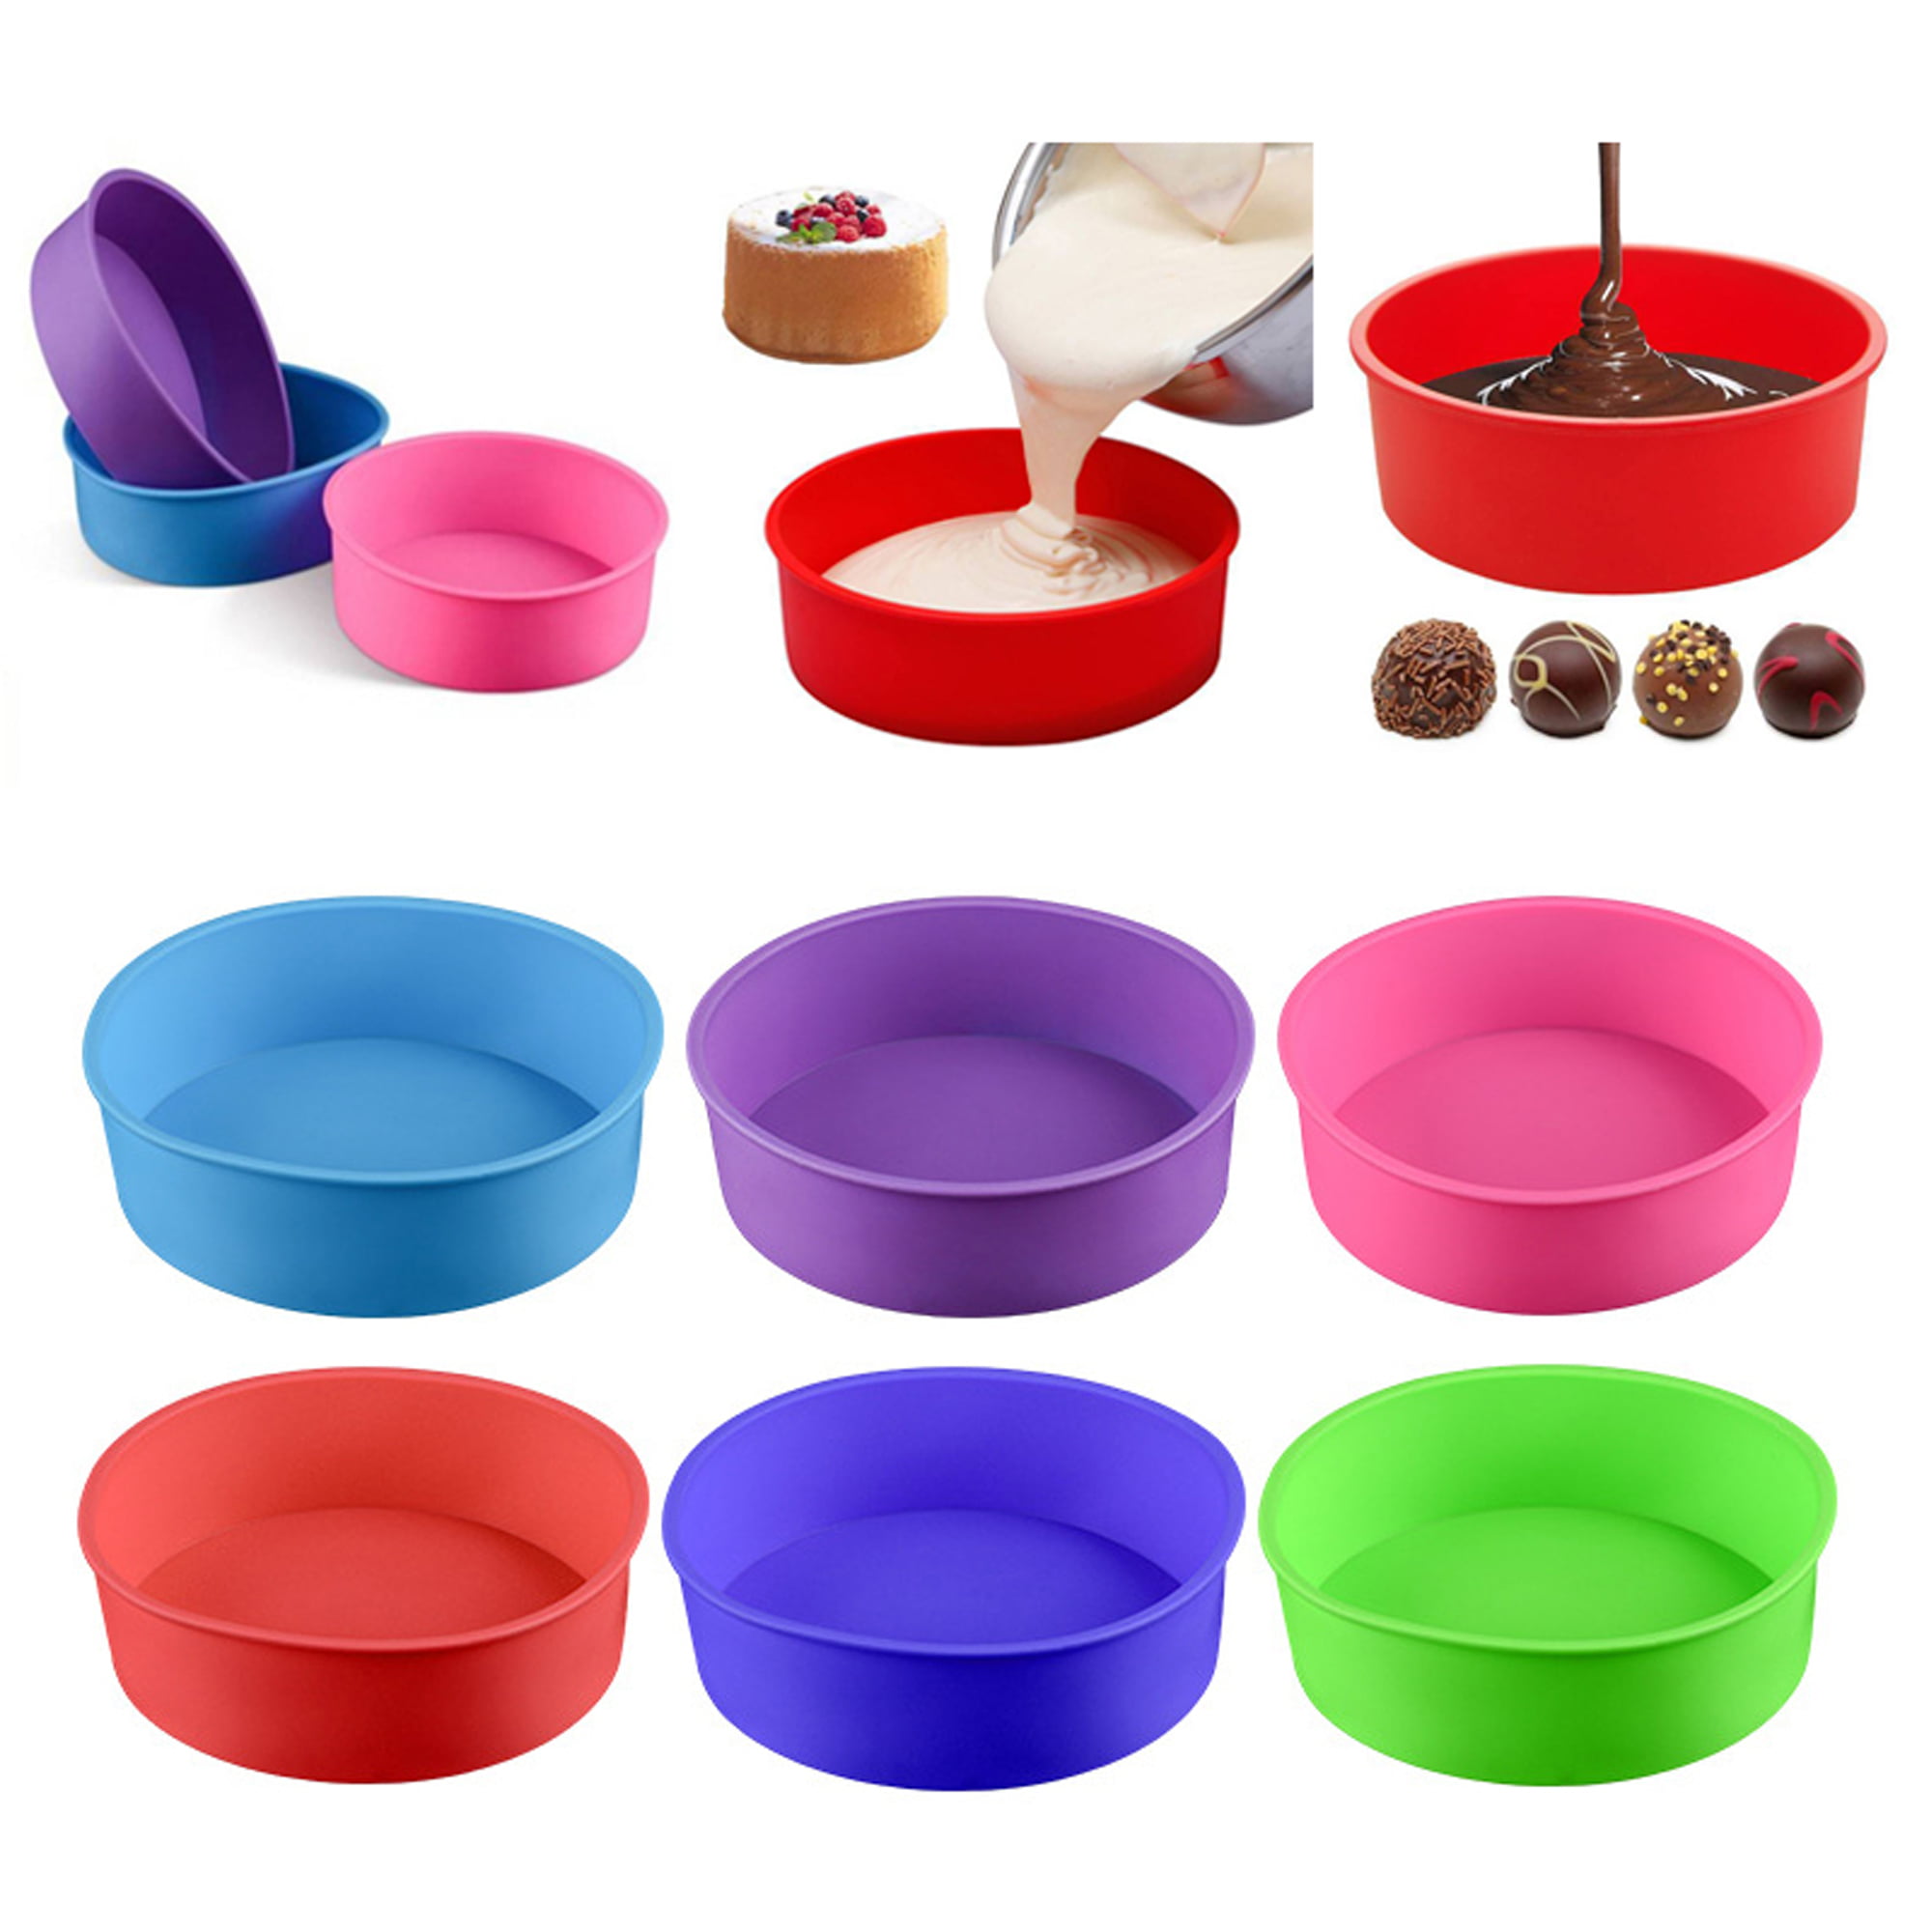 10" Round Silicone Cake Mold Pan Muffin Chocolate Pizza Pastry Baking Tray Mould 